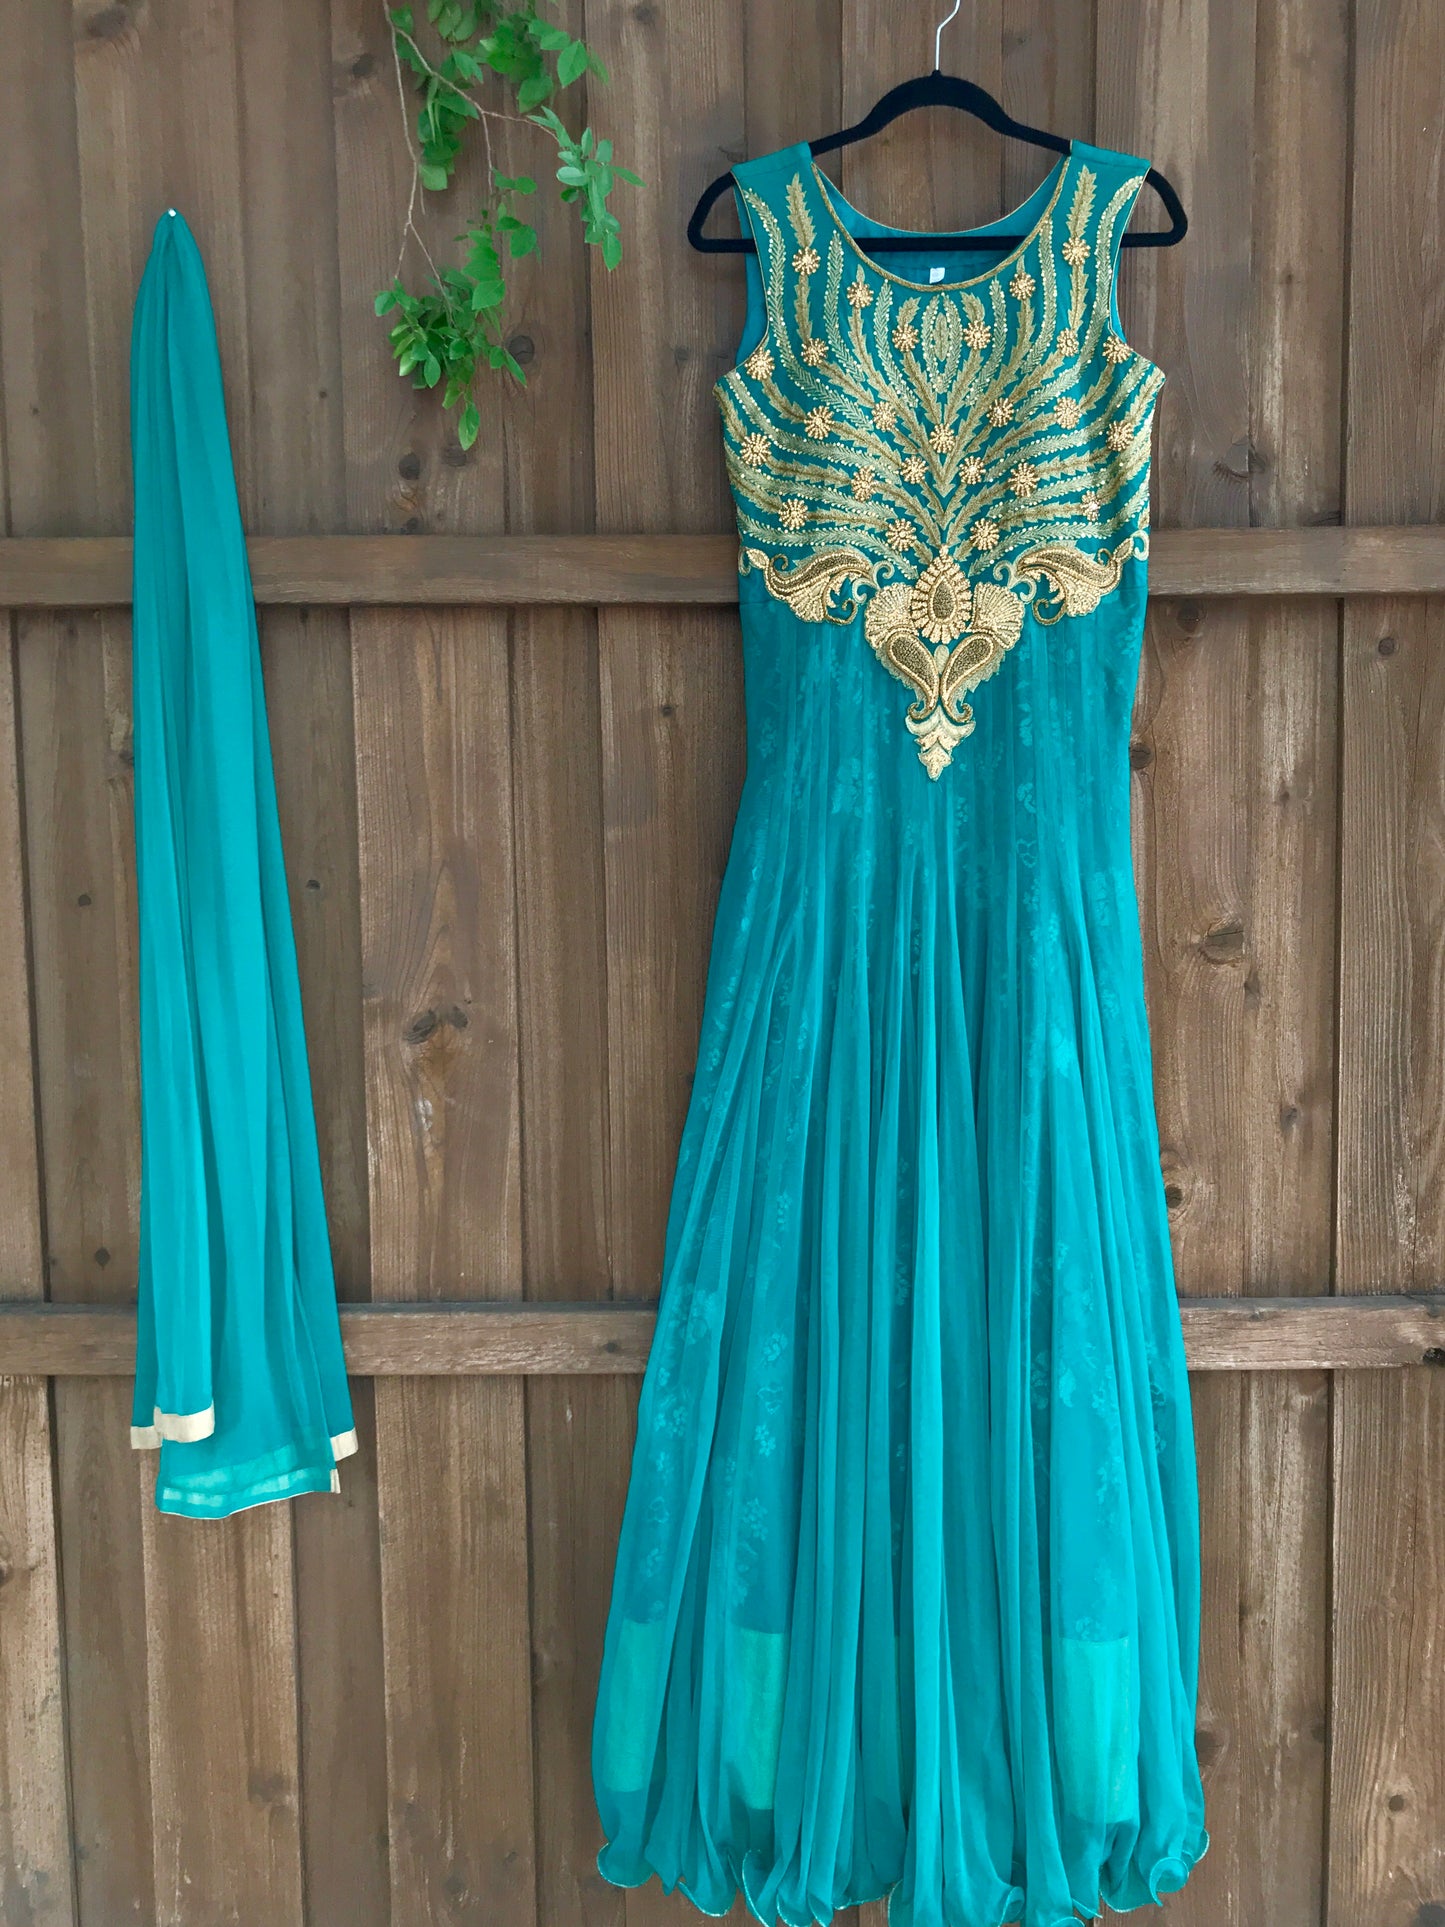 Teal Gold Gown